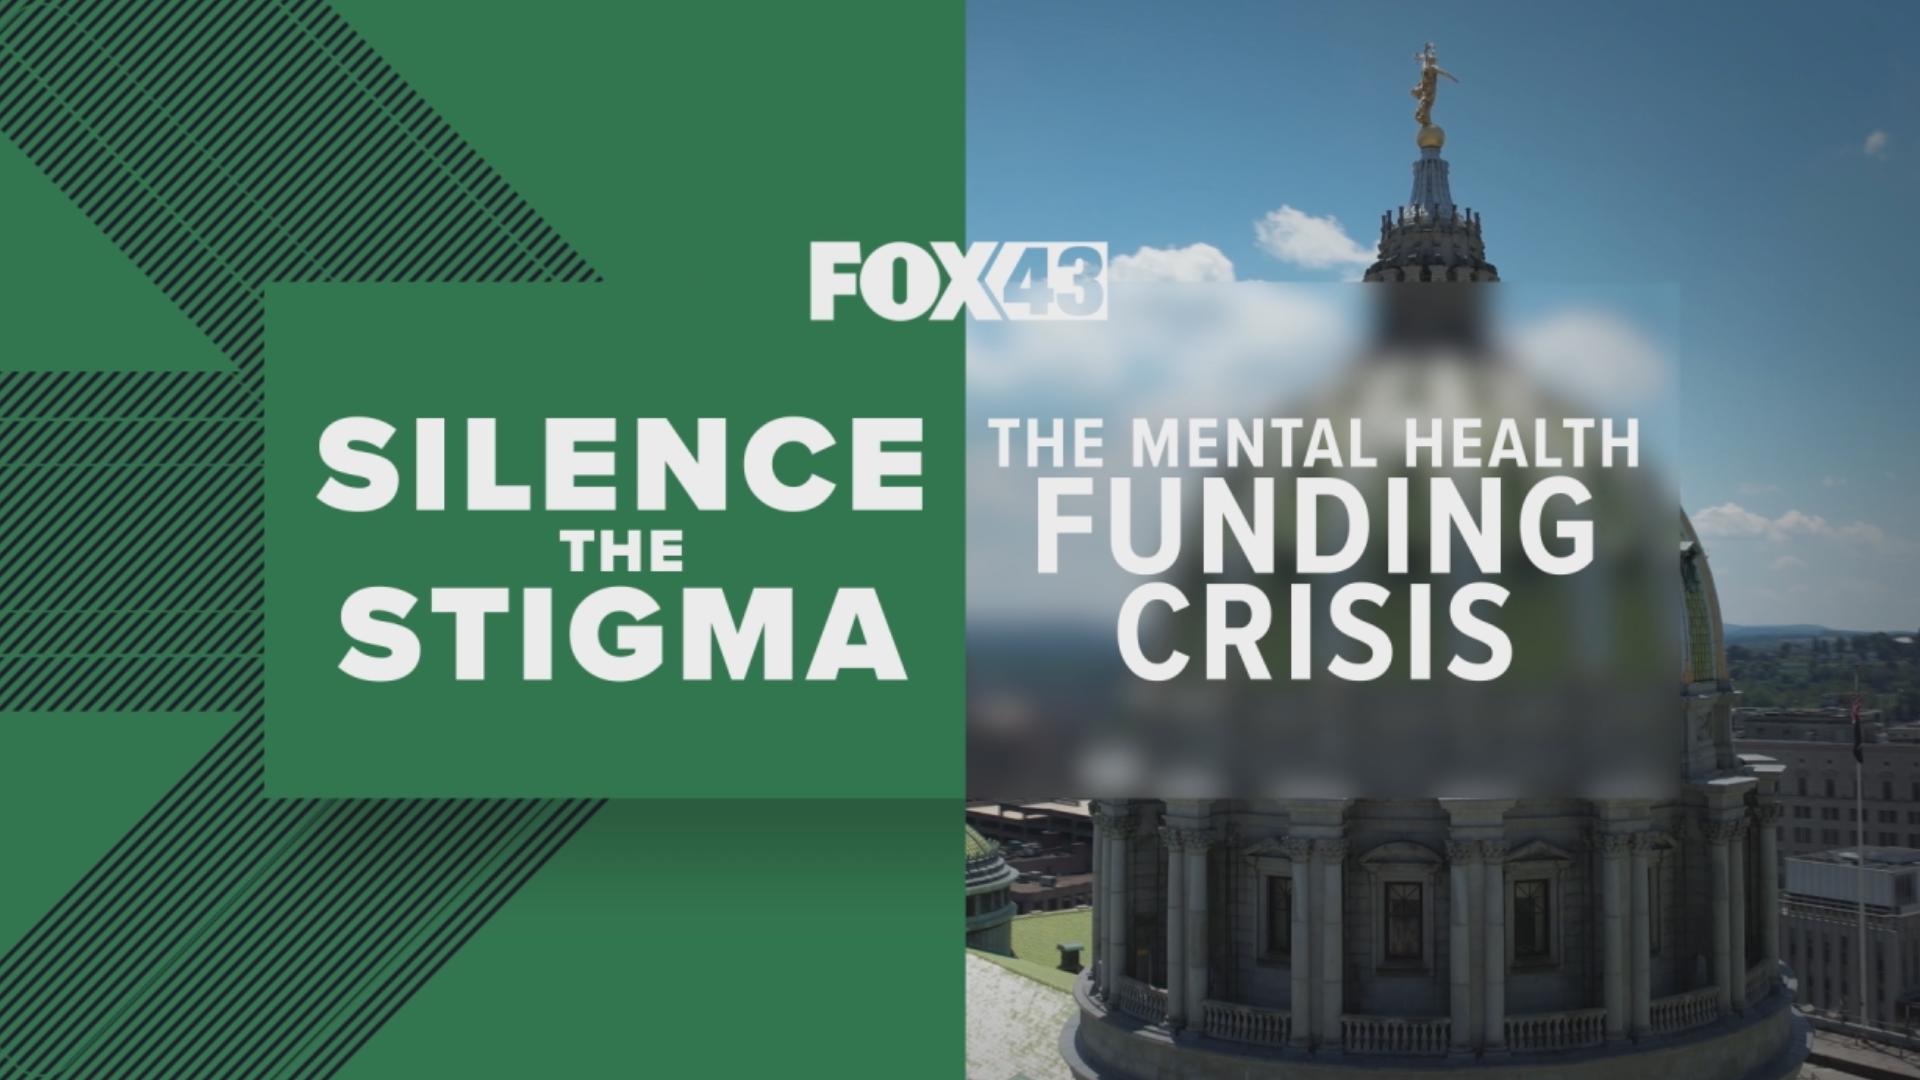 For over a decade, Pennsylvania counties have tried to work around a lack of state funding for vital mental health programs.